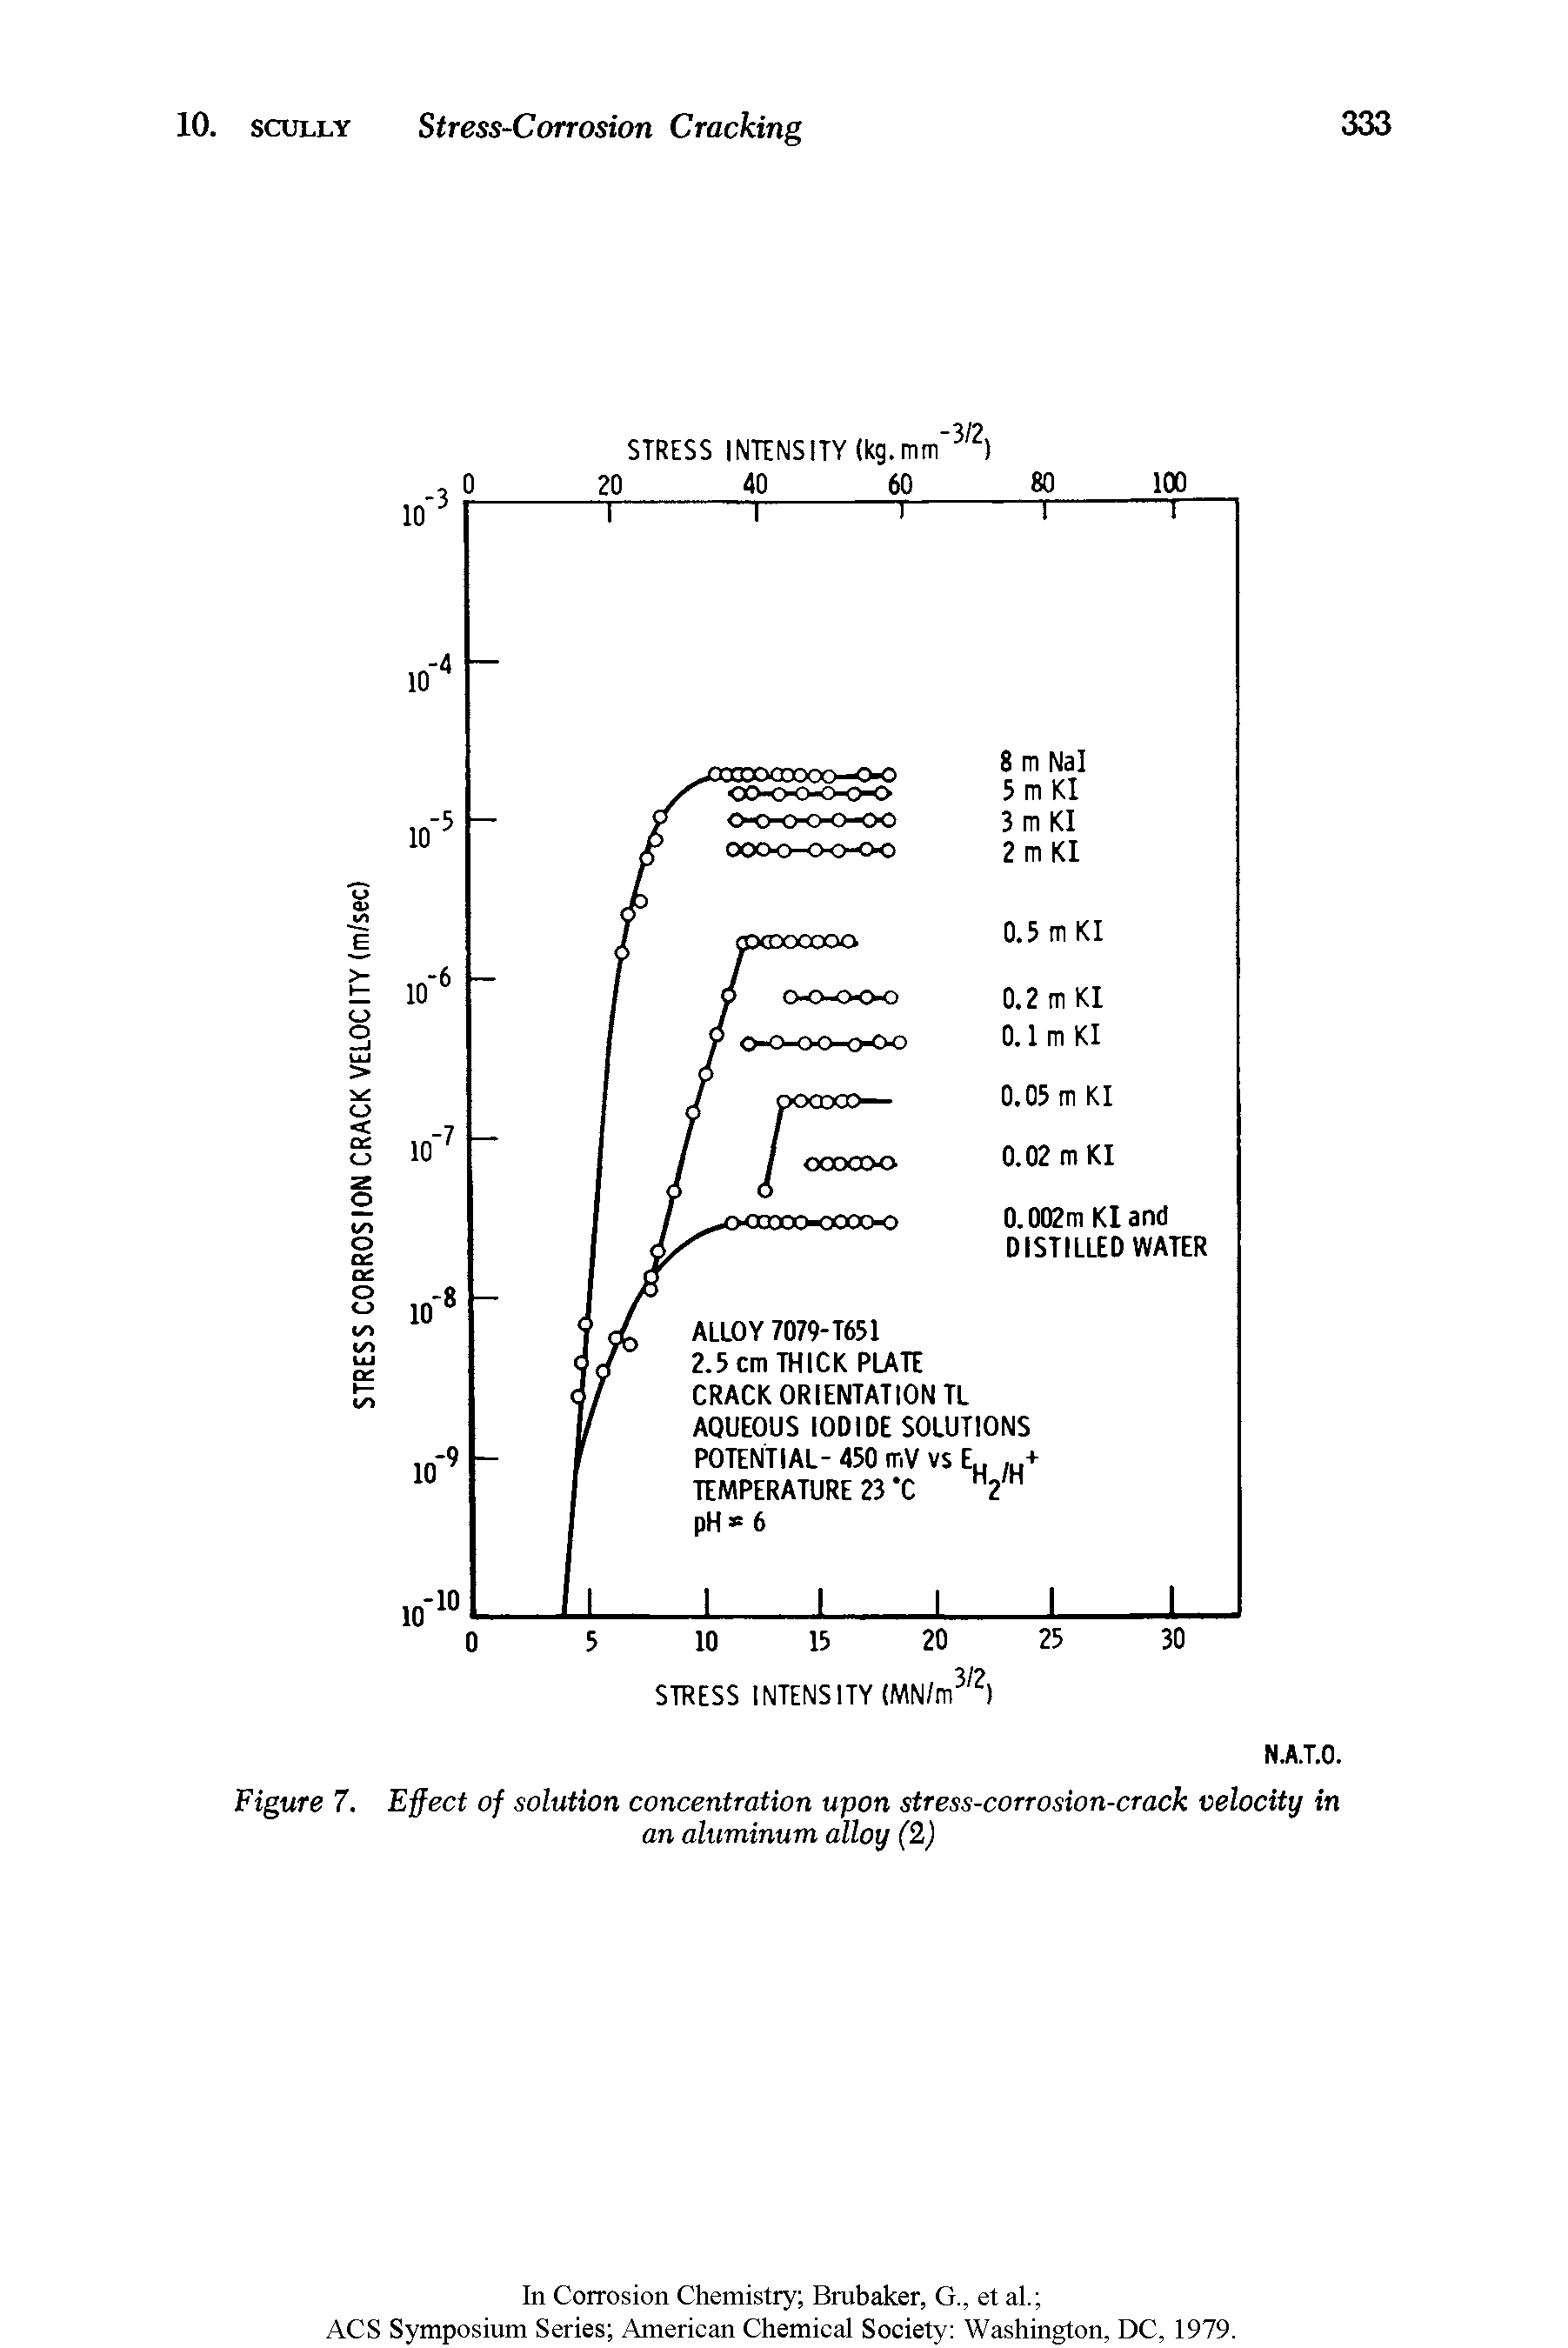 Figure 7. Effect of solution concentration upon stress-corrosion-crack velocity in...